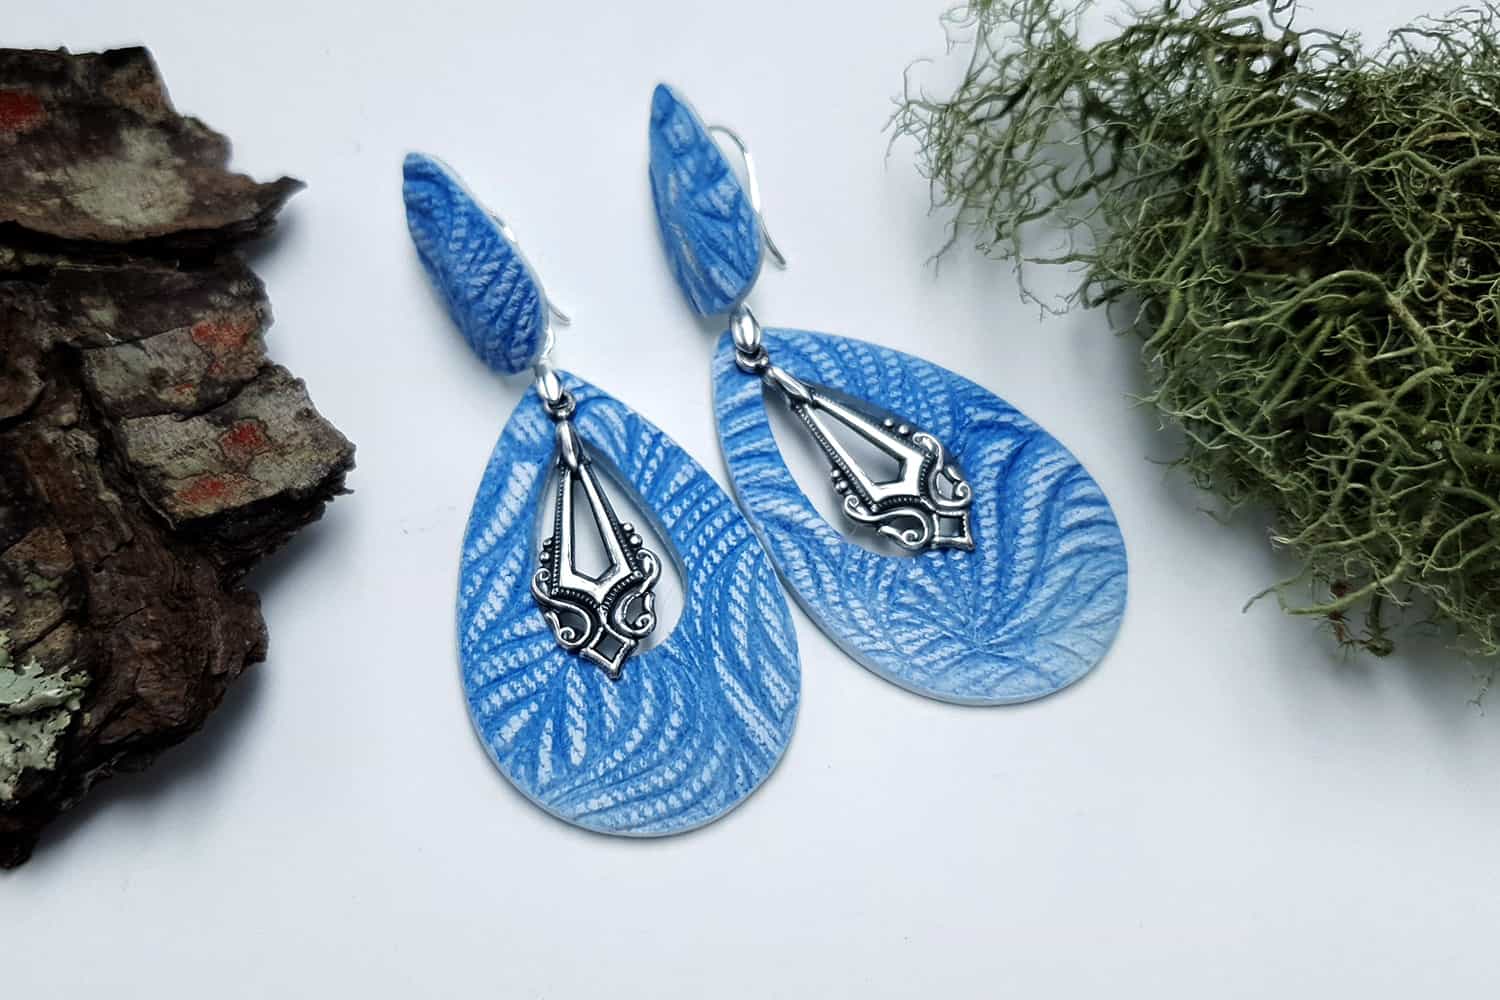 Jewelry from "Faux Jeans/Denim Fabric" course for your inspiration #9